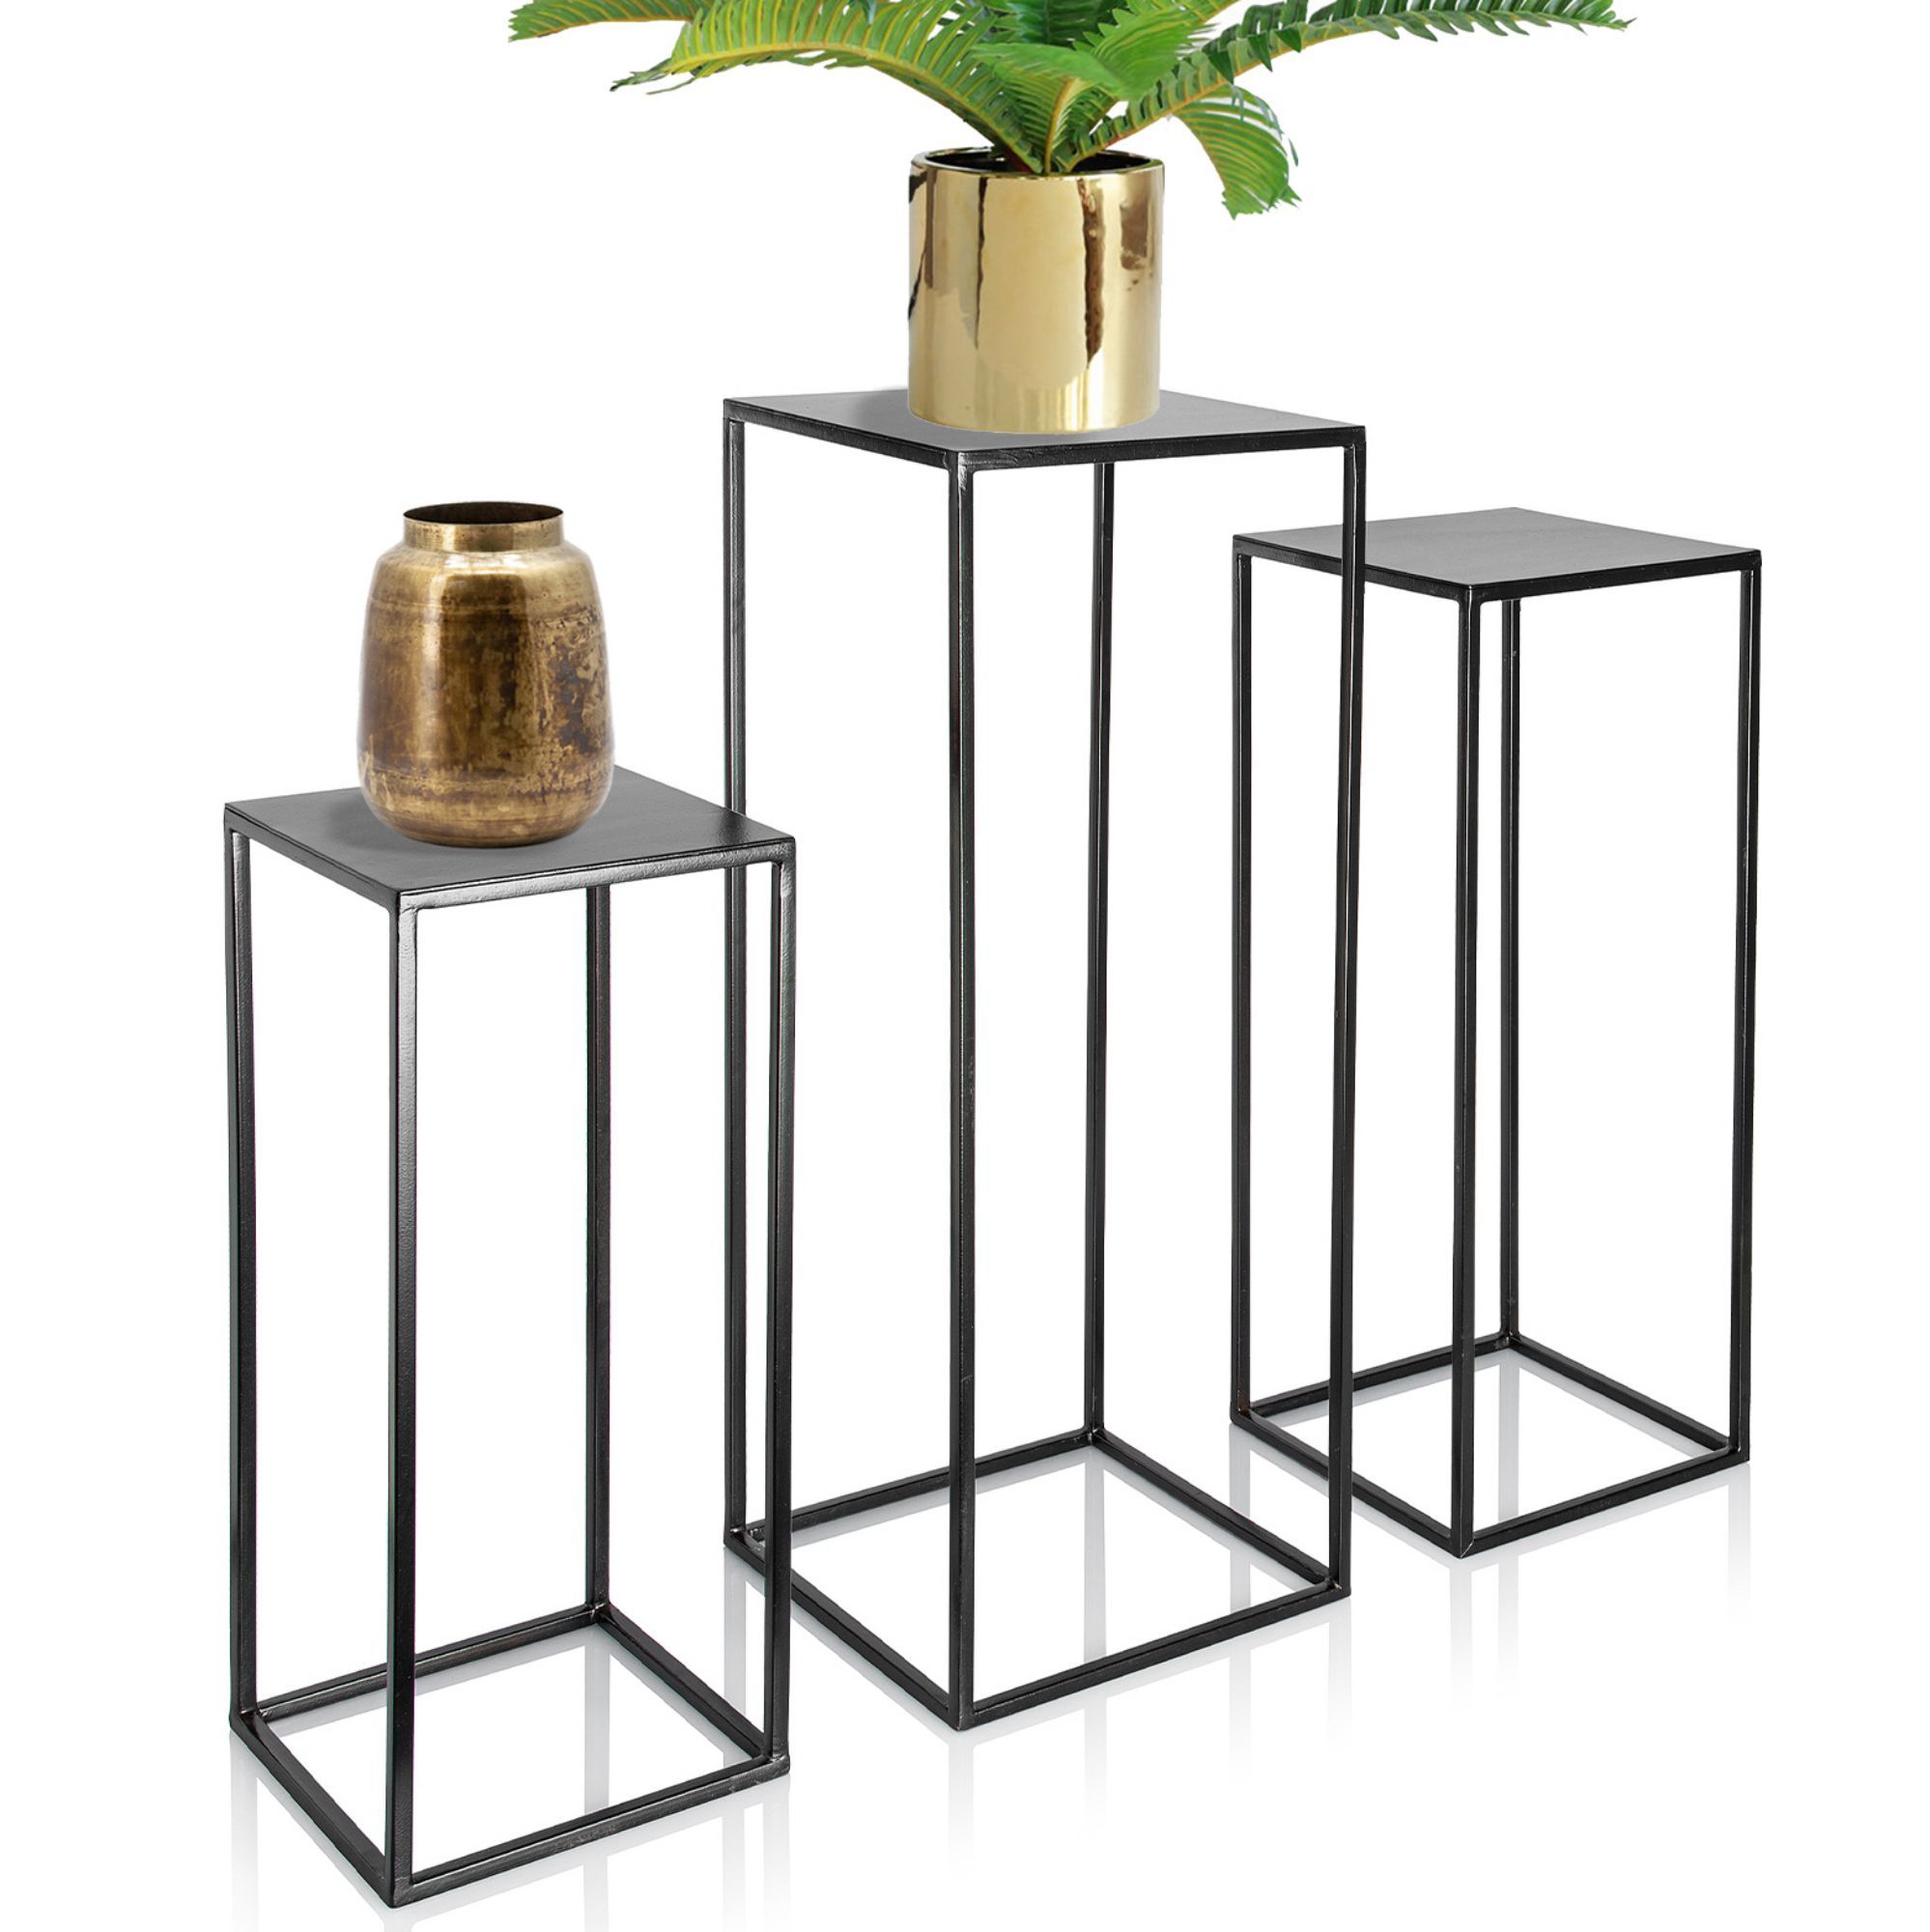 Trio Metal Plant Stand With High Square Rack Flower Holder | Kimisty For Metal Plant Stands (View 15 of 15)